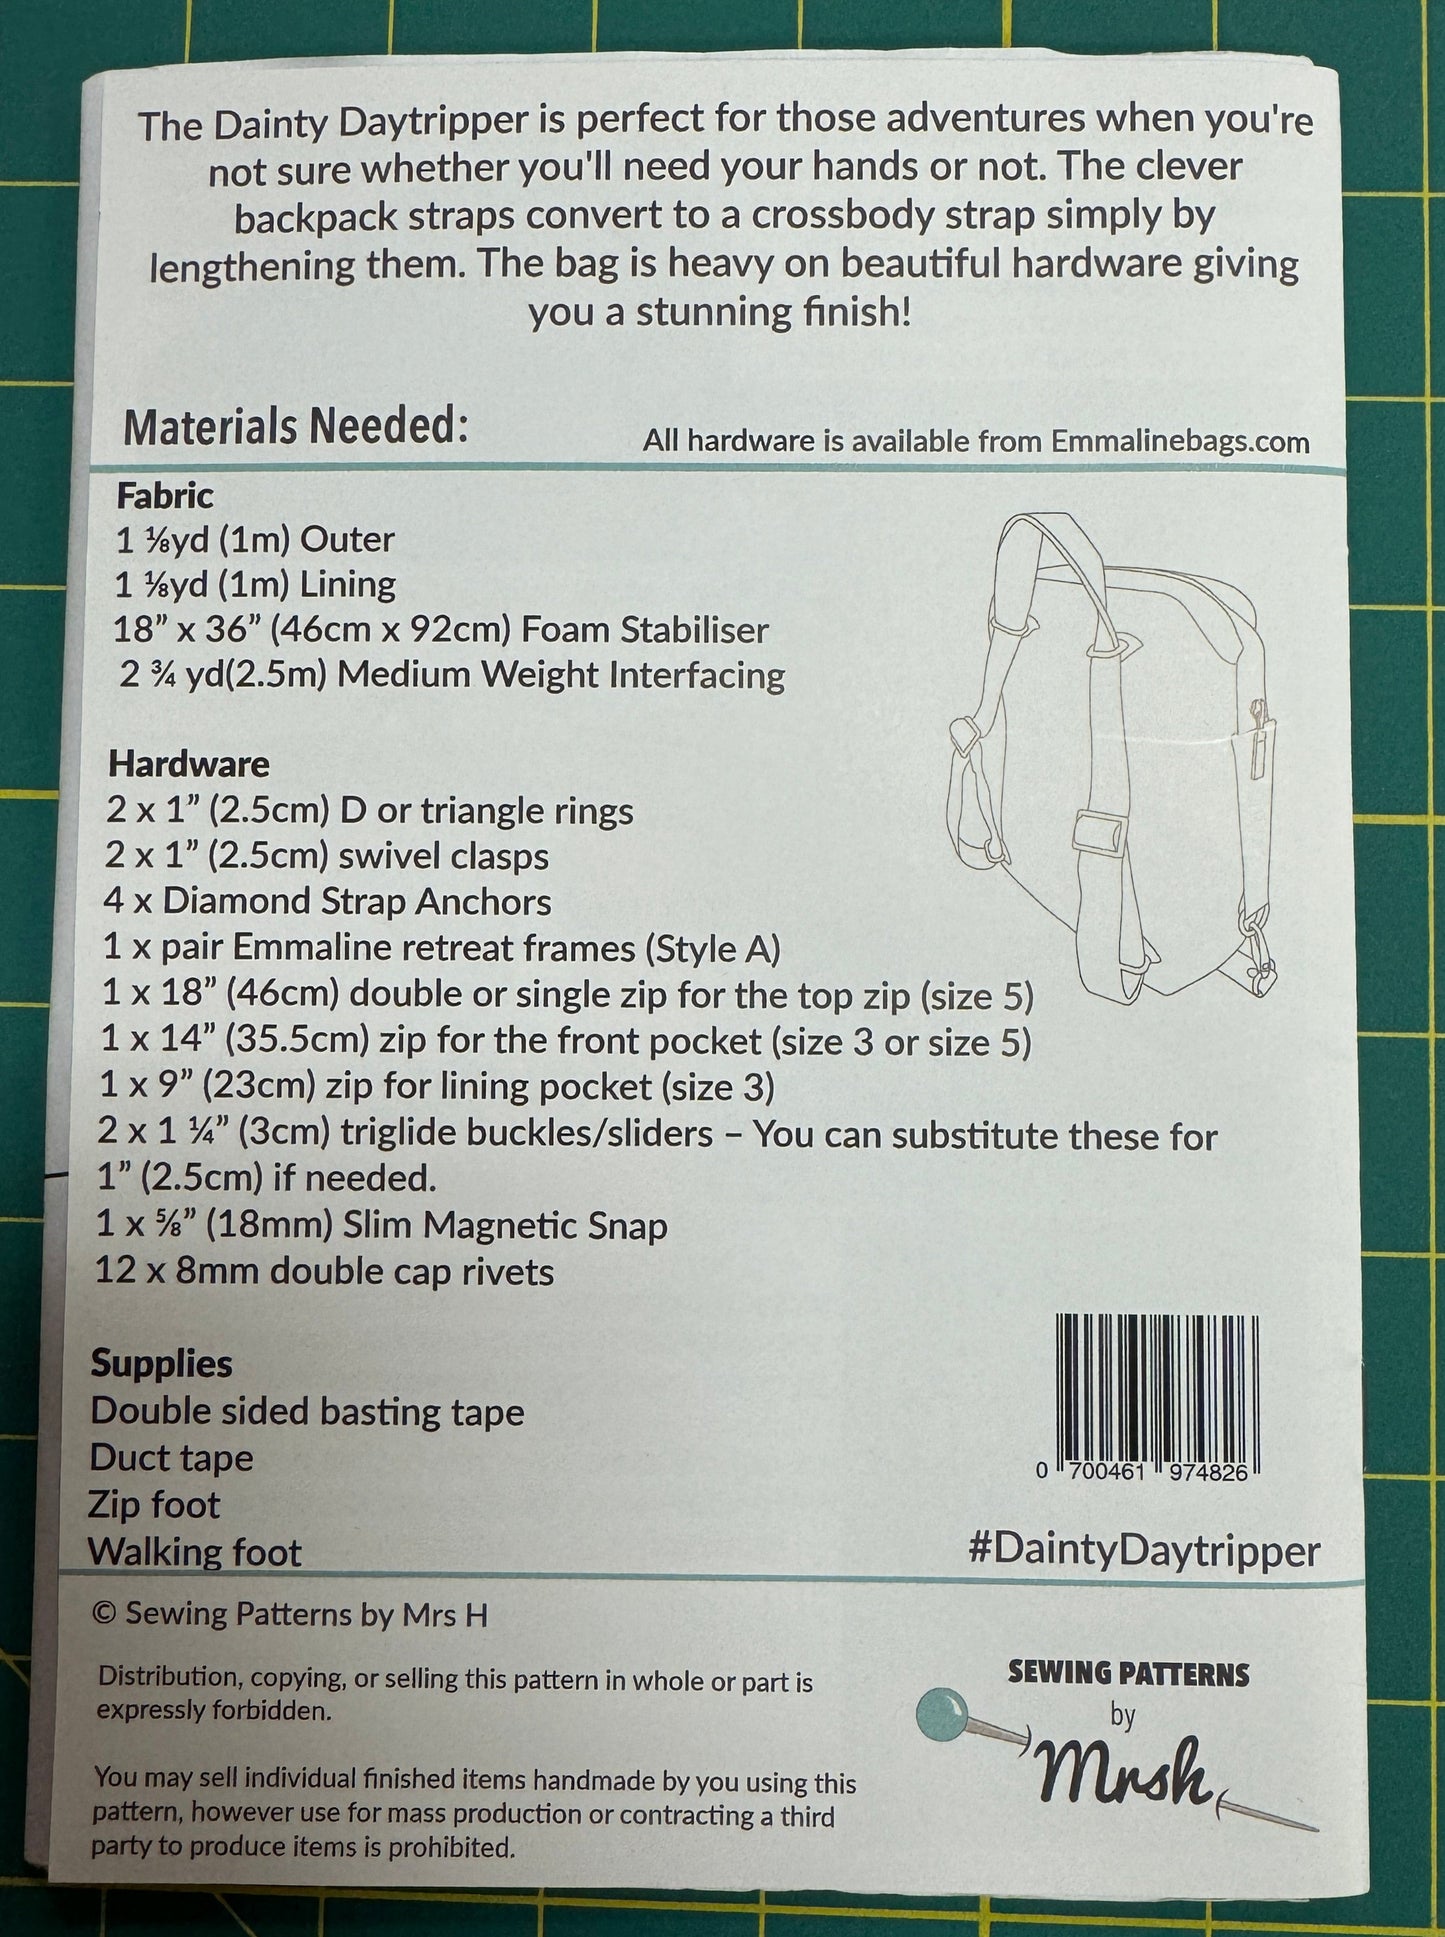 The Dainty Daytripper sewing pattern